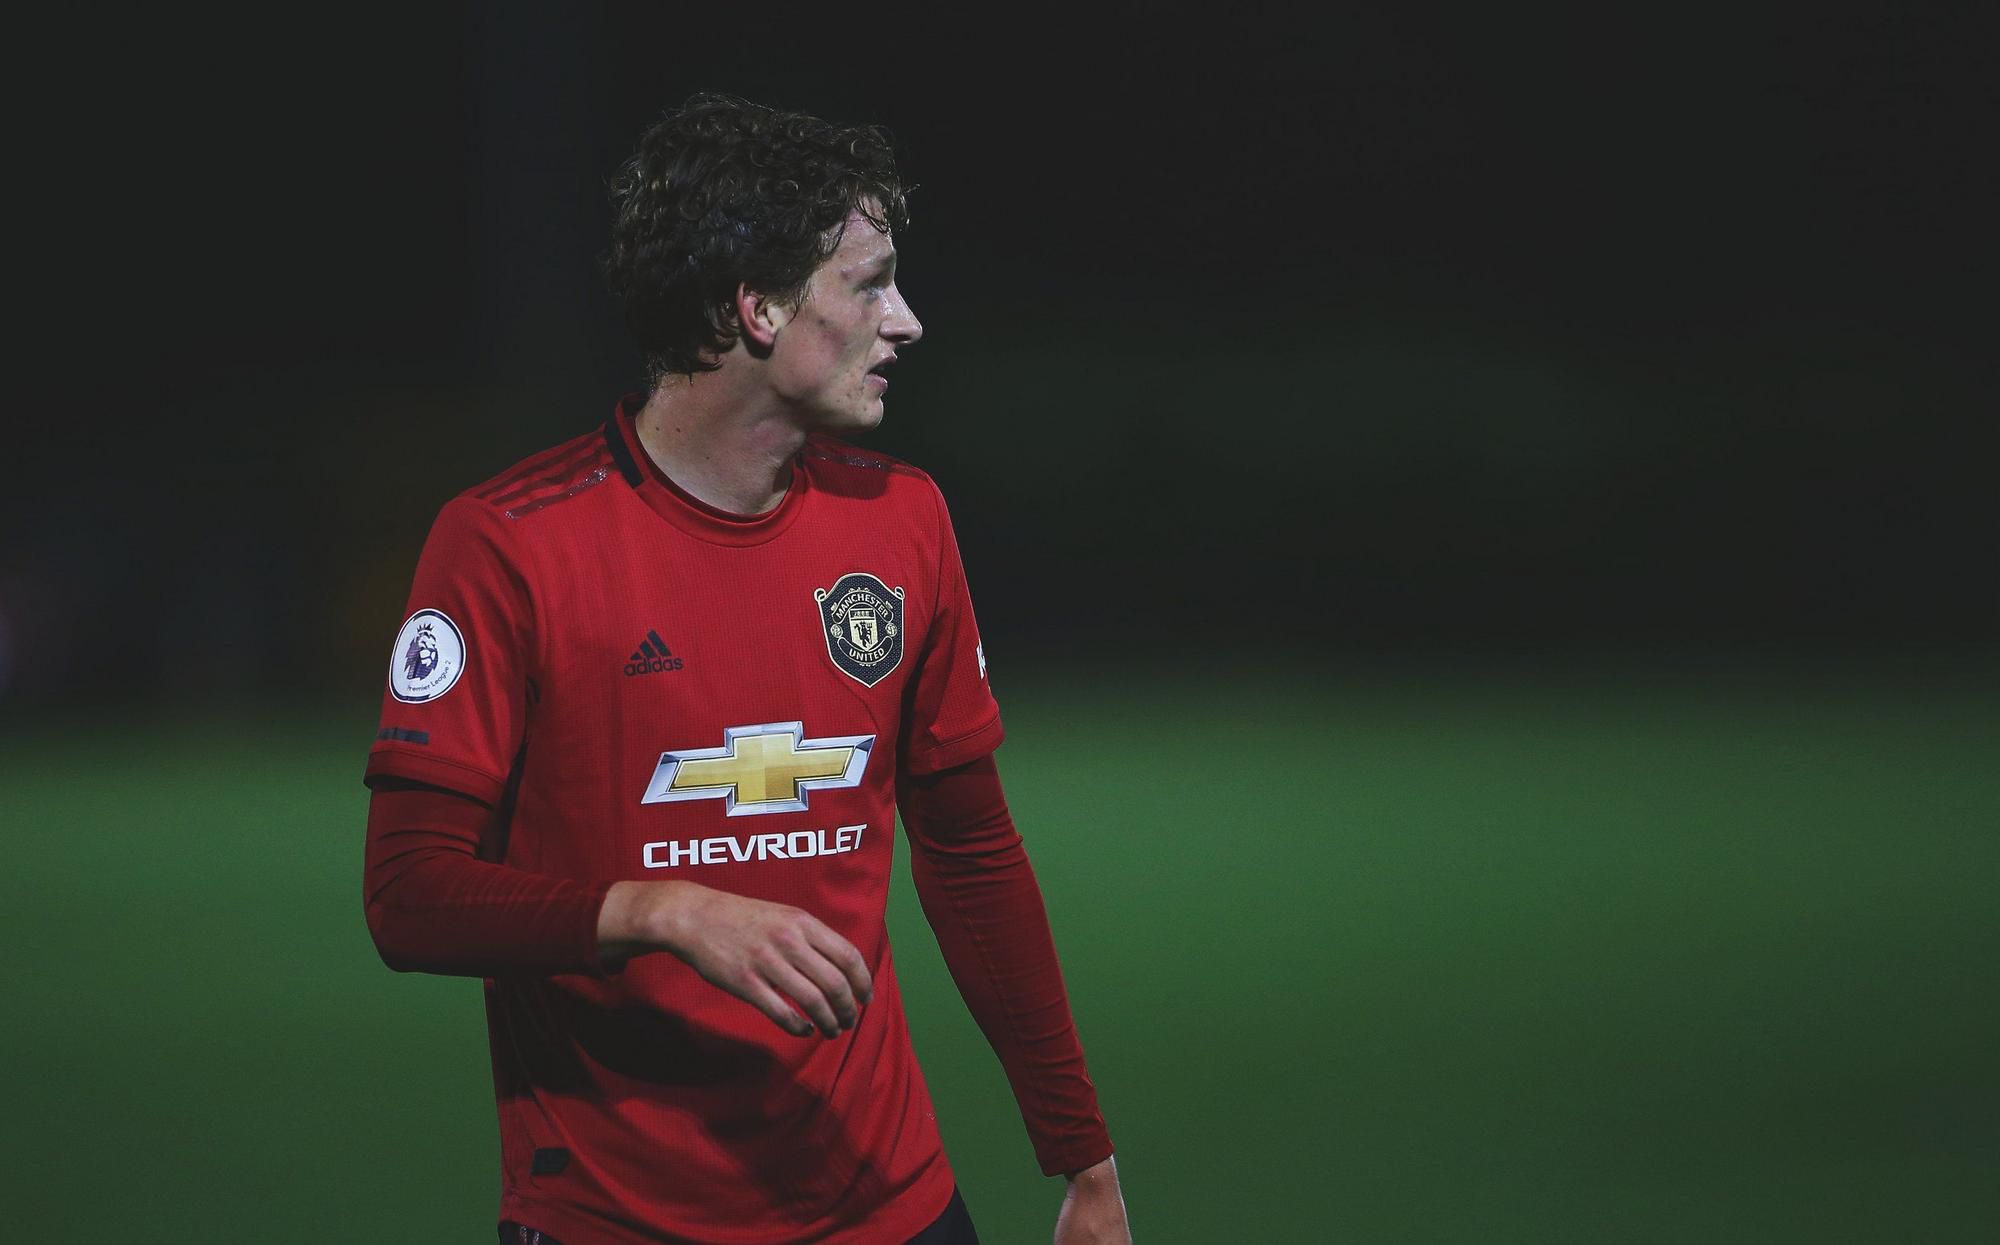 Max Taylor, Manchester United